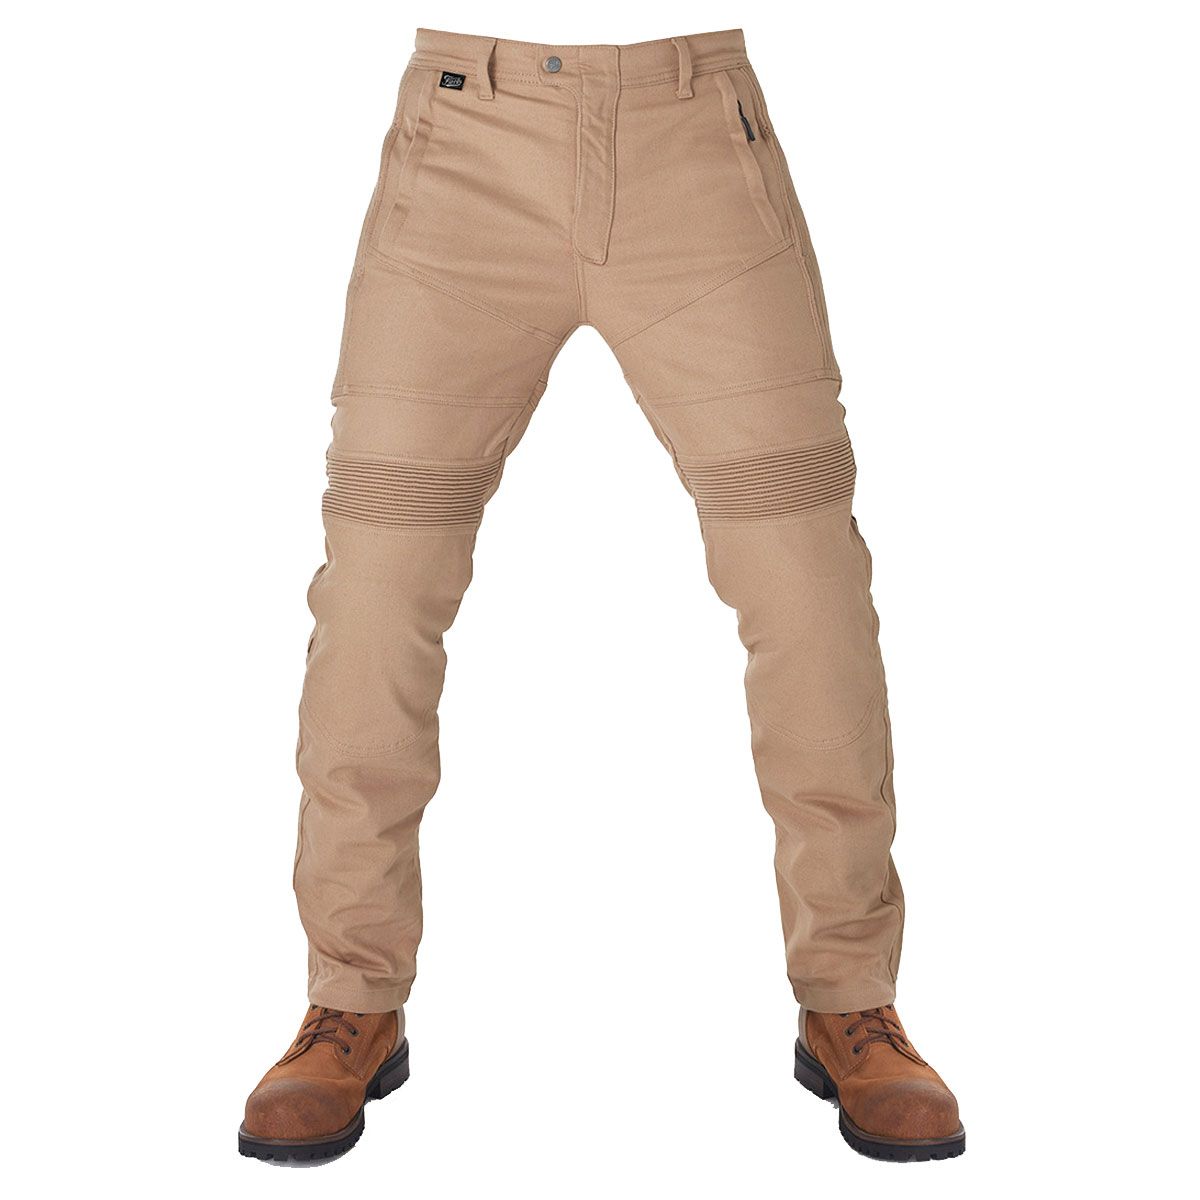 MILA CARGO BEIGE - Motorcycle Jeans for Women with Chino Style